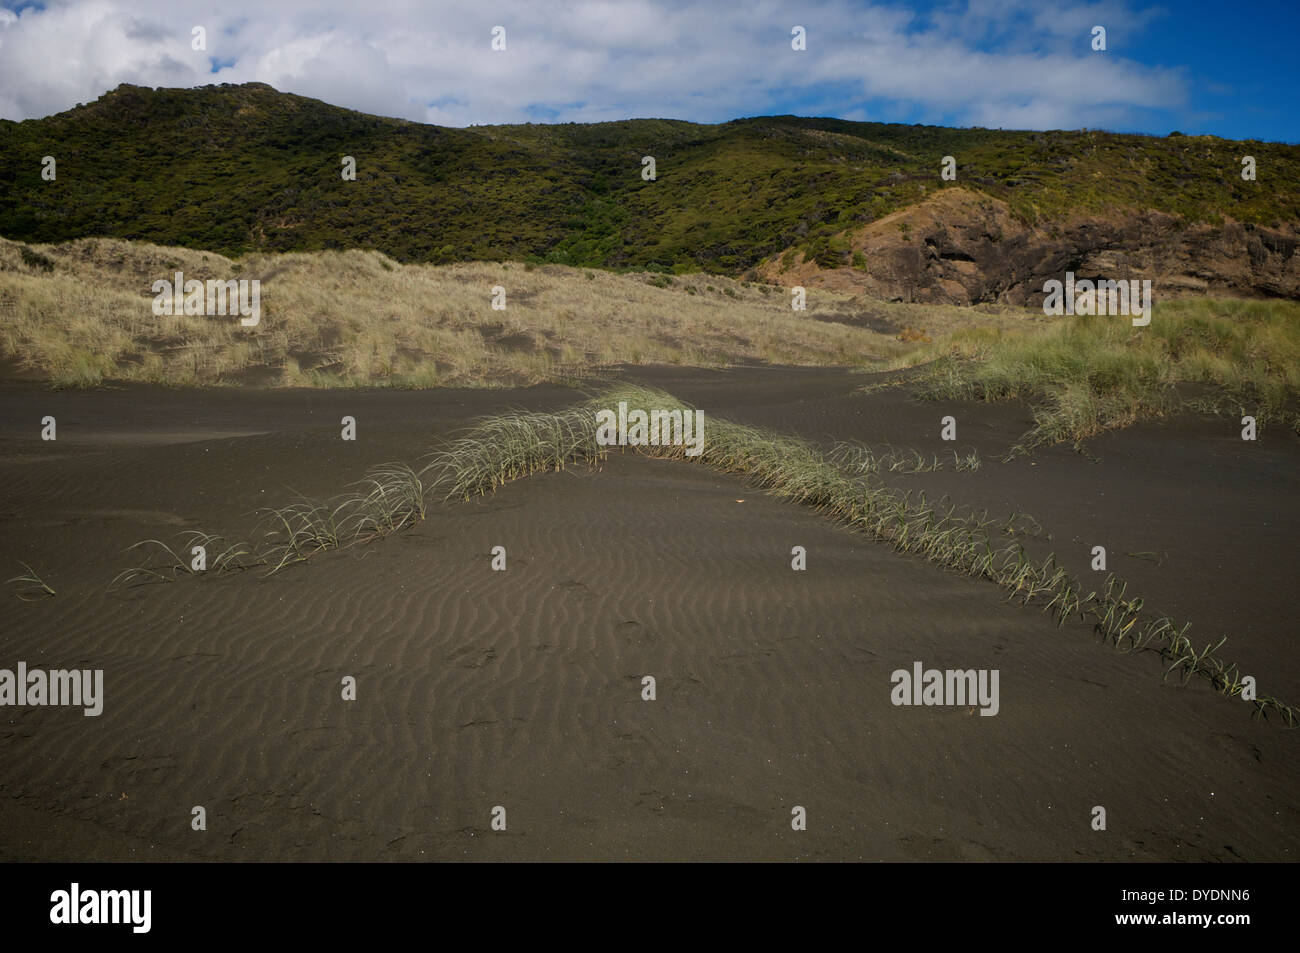 Grass struggles to gain a foothold on black volcanic sand at Karekare beach, Waitakere New Zealand. Stock Photo